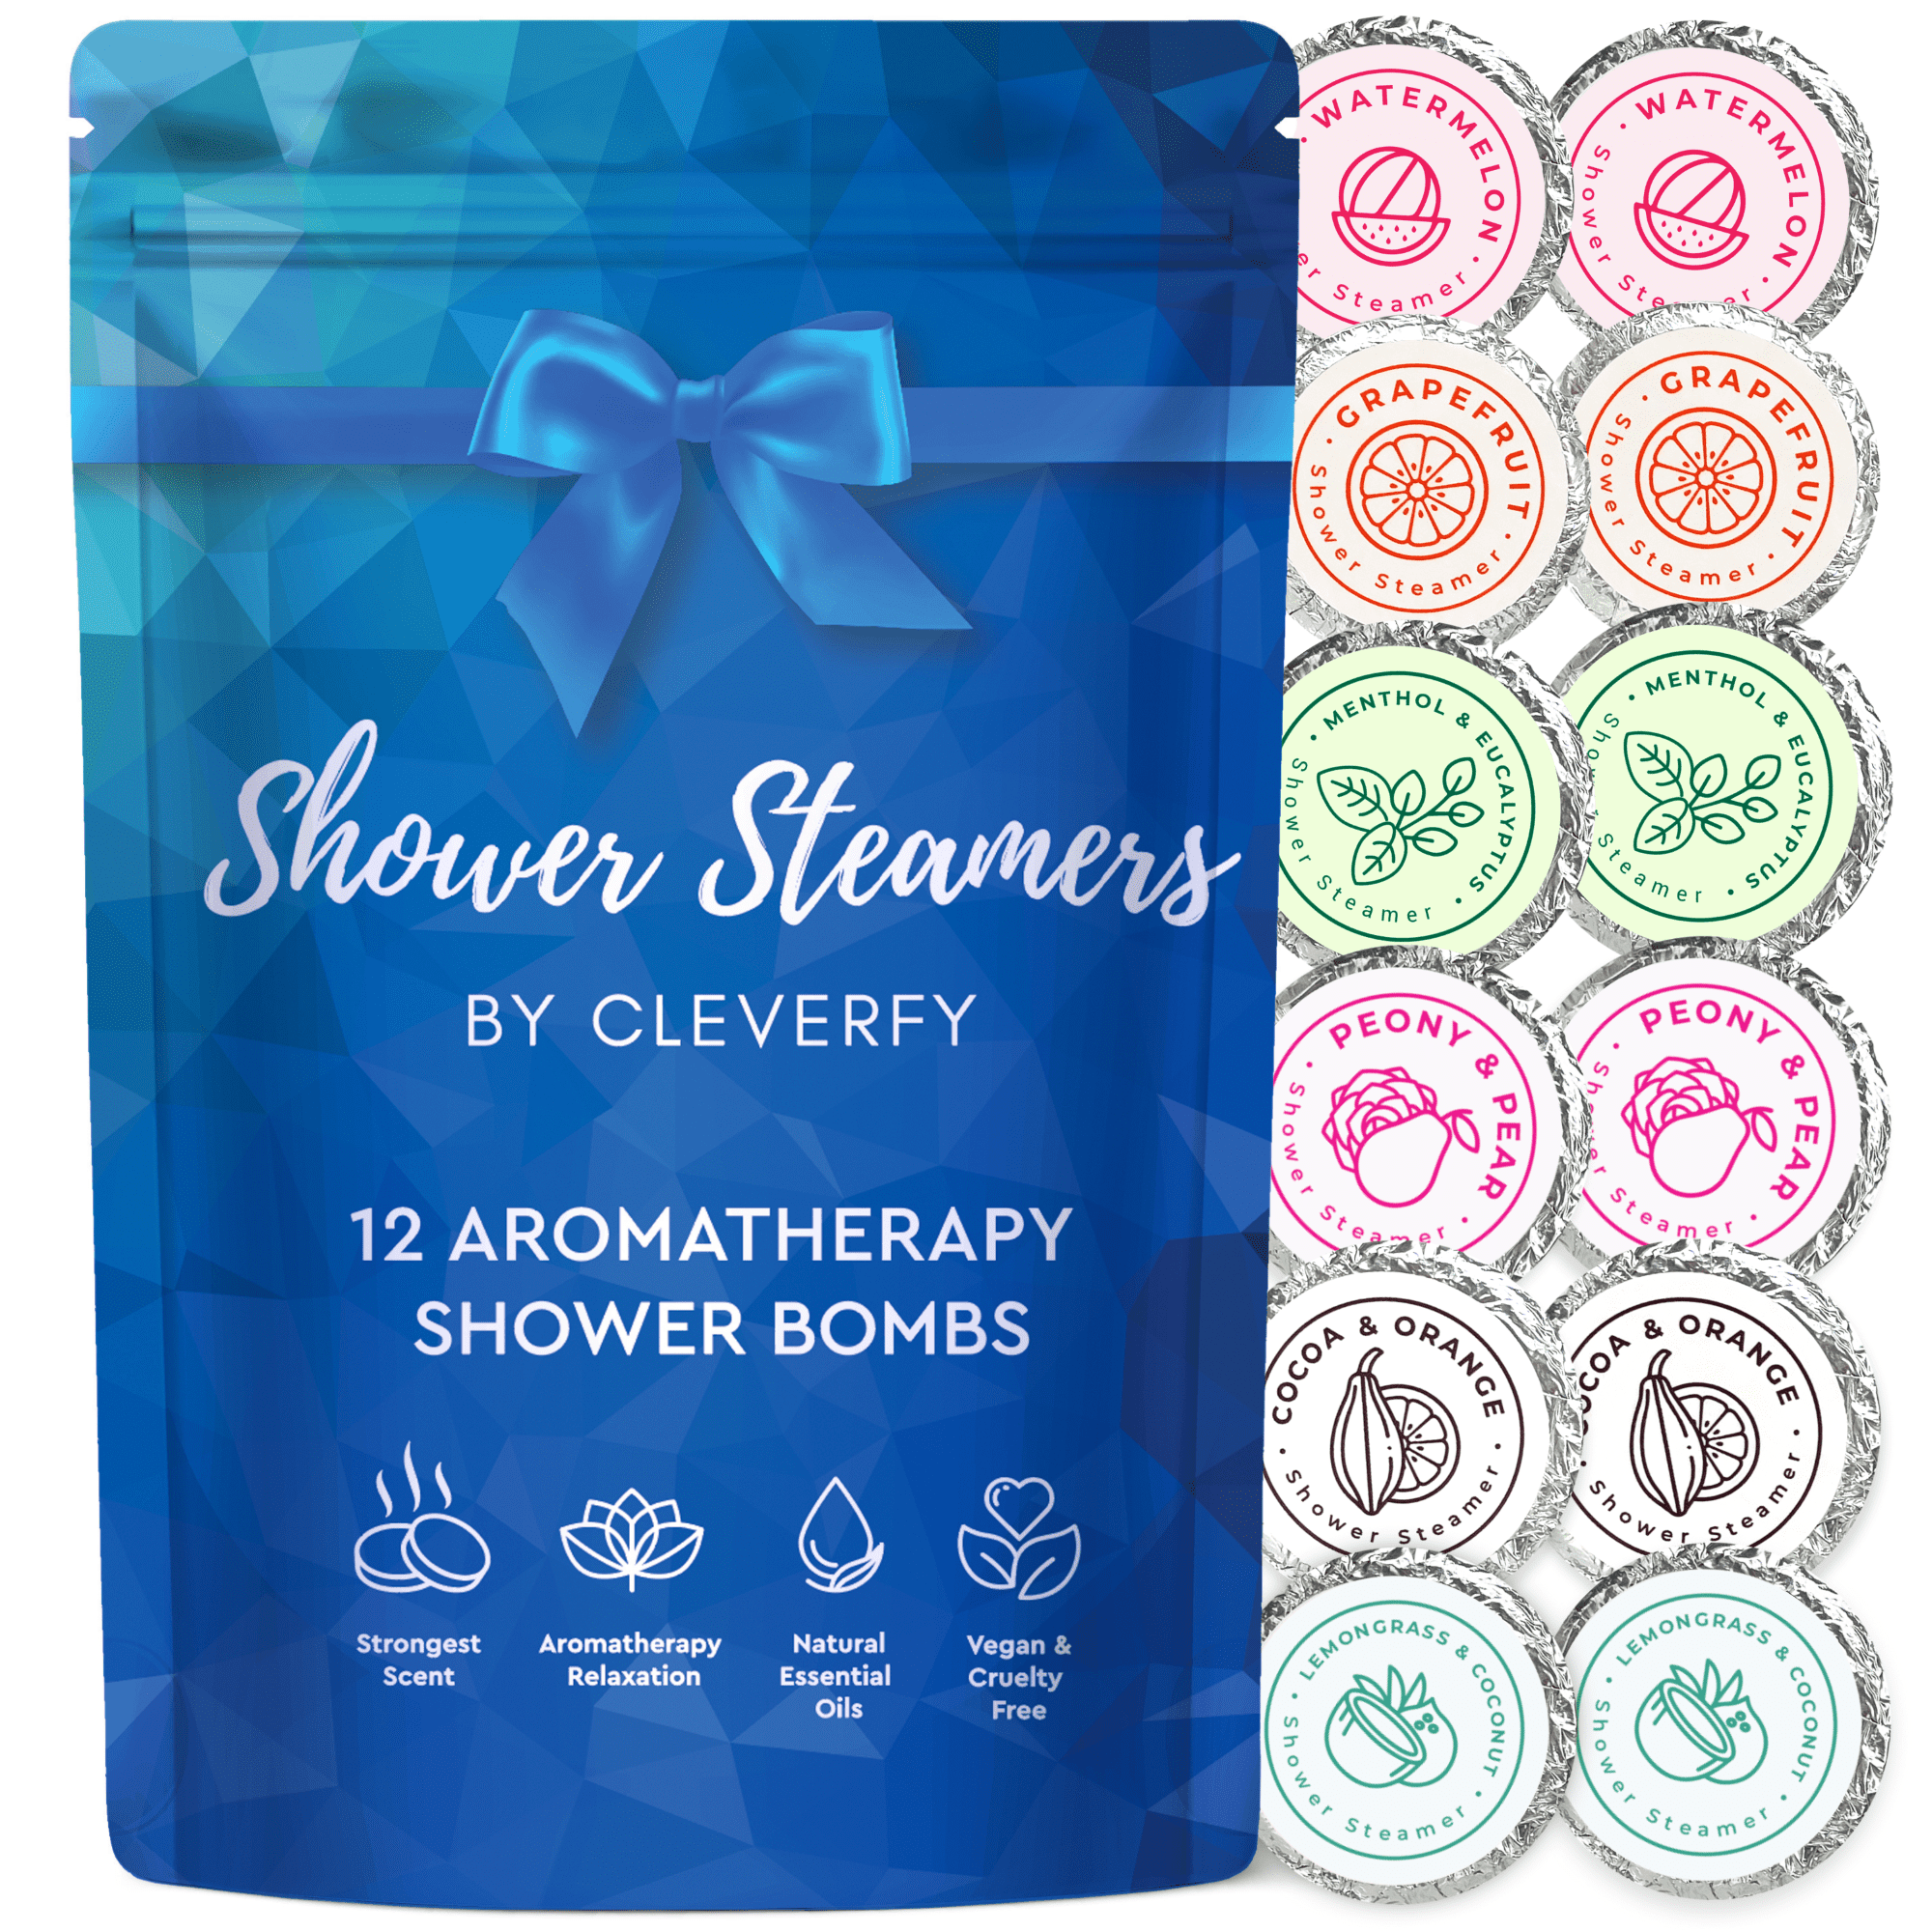 SEONNIX Shower Steamers Aromatherapy, 12-Pack Bath Bombs Shower Tablets  Gift Set, Self Care & SPA Relaxation, Stocking Stuffers Christmas Gifts for